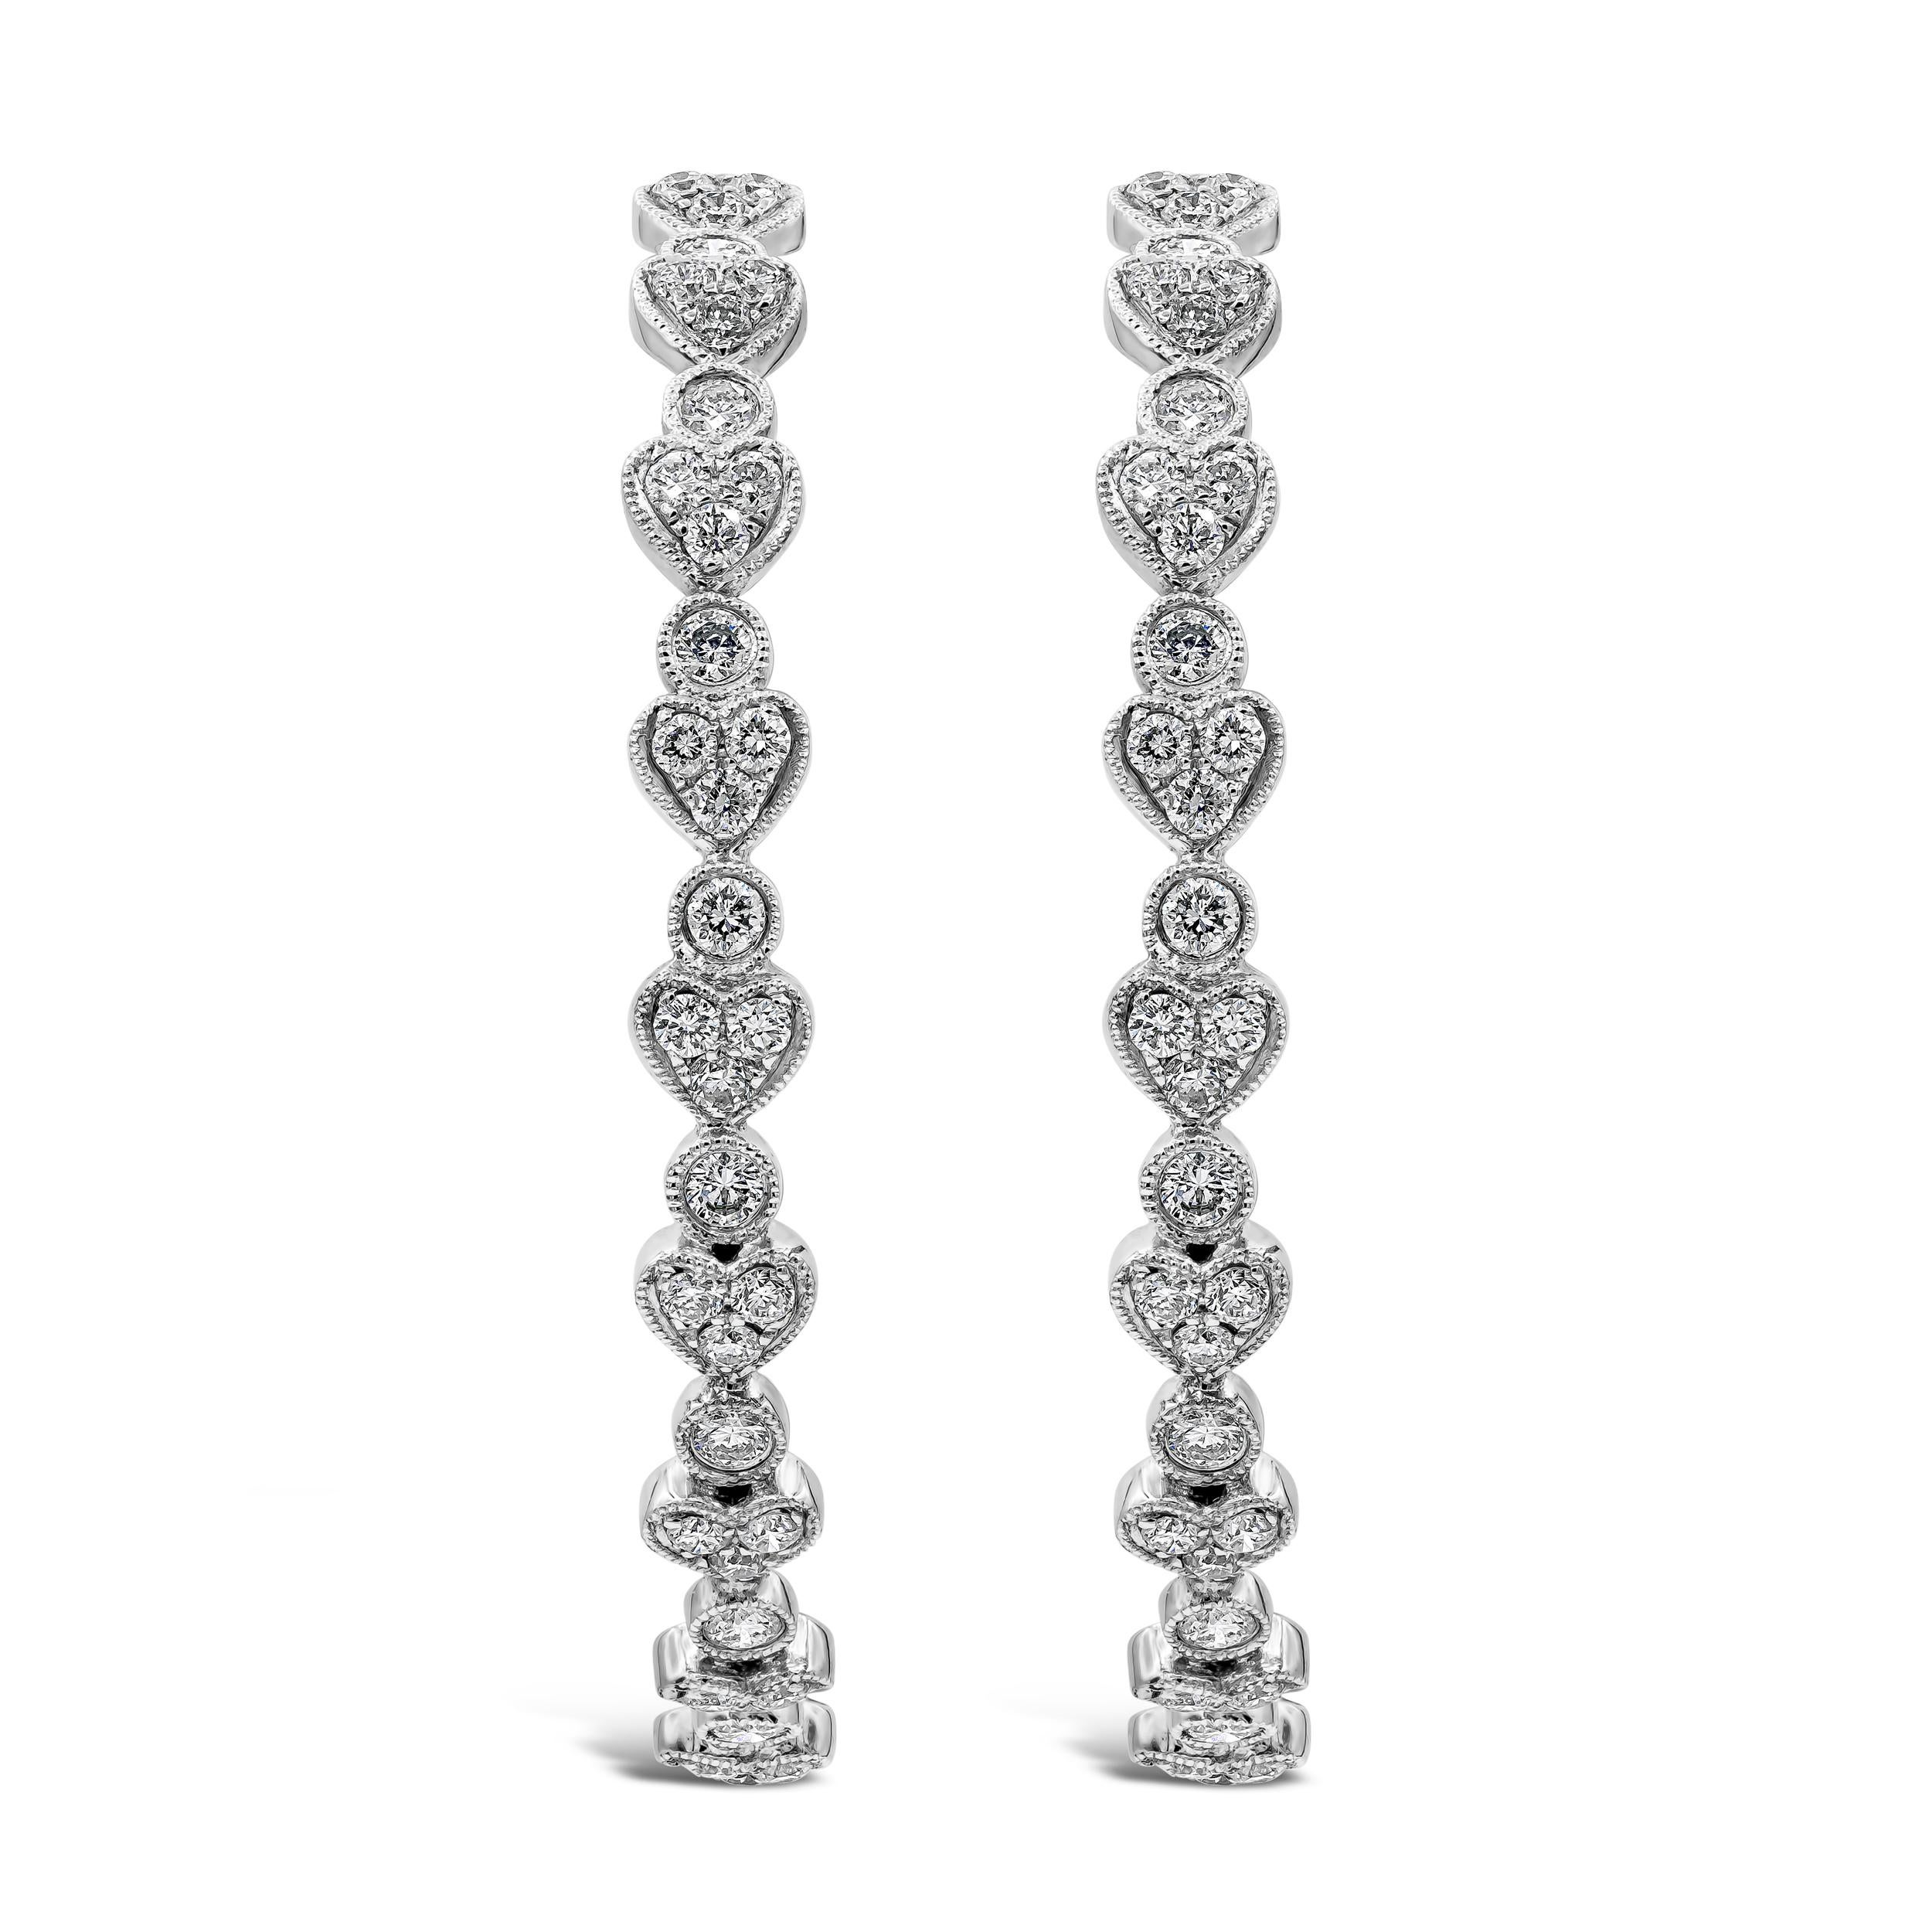 This trendsetting hoop earrings showcases a row of heart shapes set with round brilliant diamonds. Diamonds weigh 2.65 carats total. Made in 18 karat white gold. Good for everyday wear.

Roman Malakov is a custom house, specializing in creating